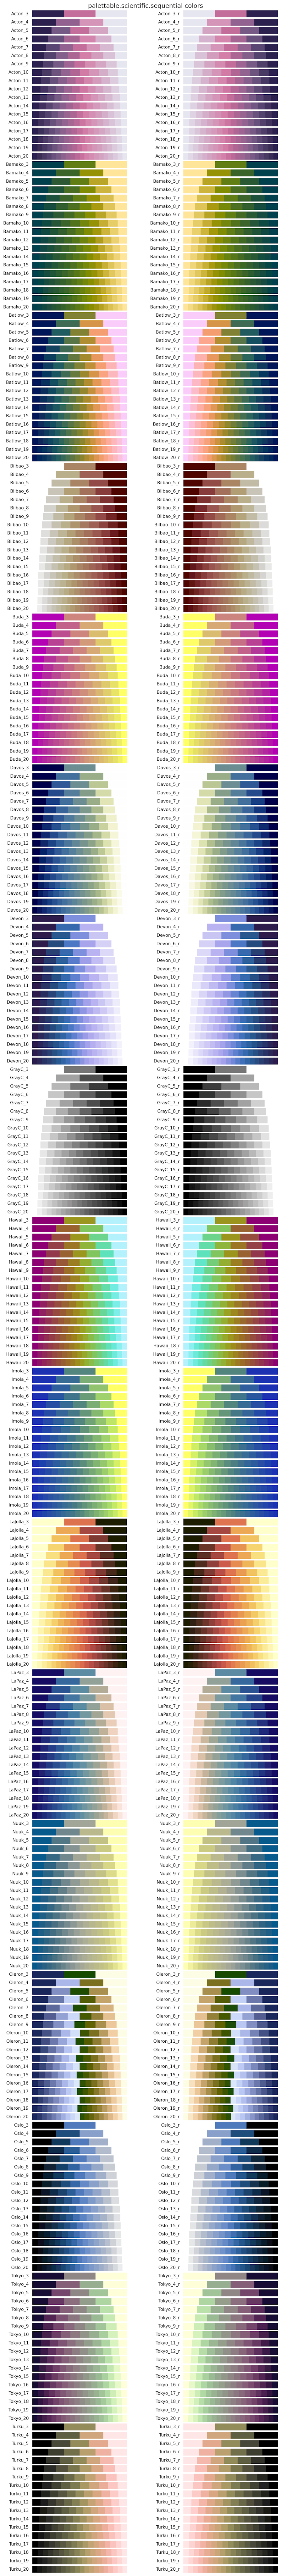 palettable_palettable.scientific.sequential_colors.png